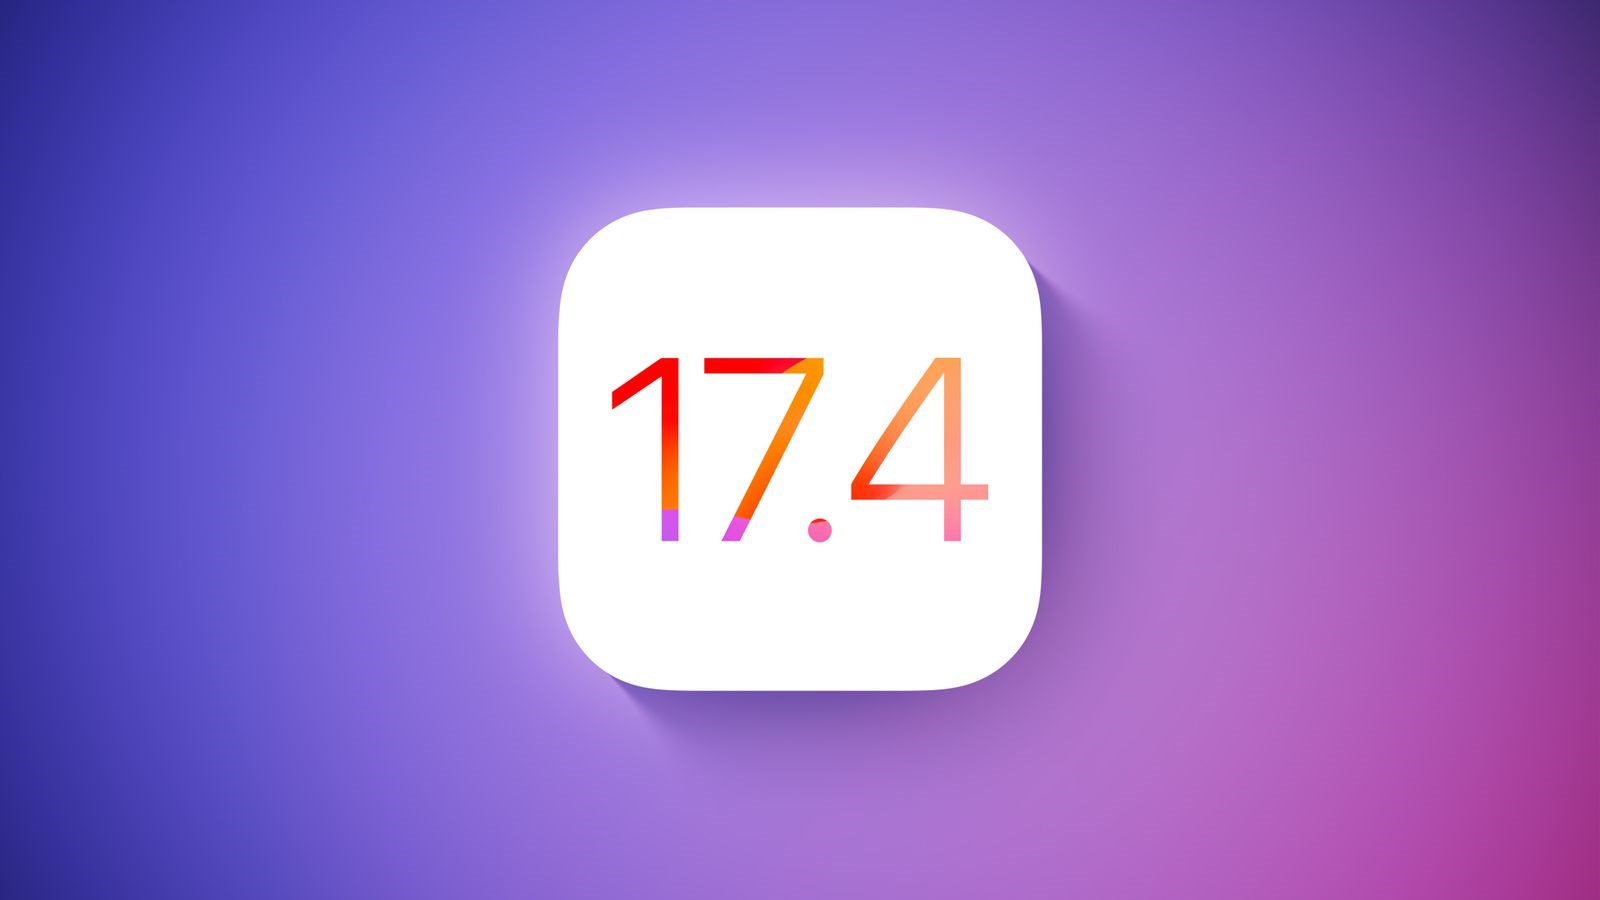 Apple debuts iOS 17.4, introducing revolutionary updates tailored for the EU market.